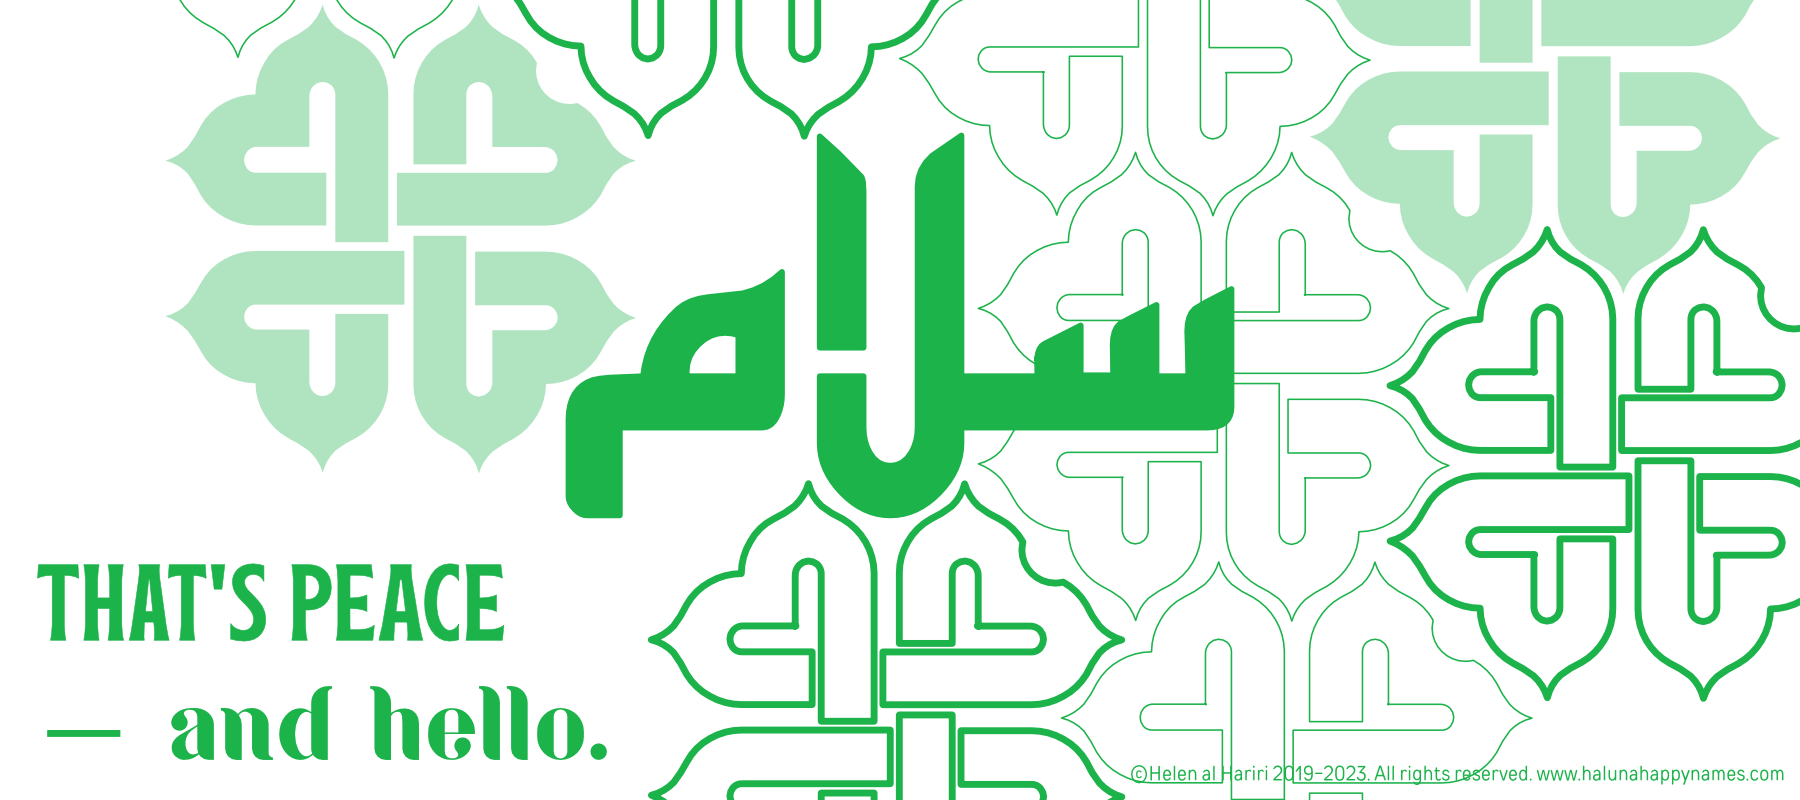 Haluna Happy Names 'Salaam' banner image showing 'Salaam' written in green modern Kufic typeface in Arabic in centre, and 'That's peace — and hello' in English in bottom left. Against background of interwoven green and white tiles to match the typeface